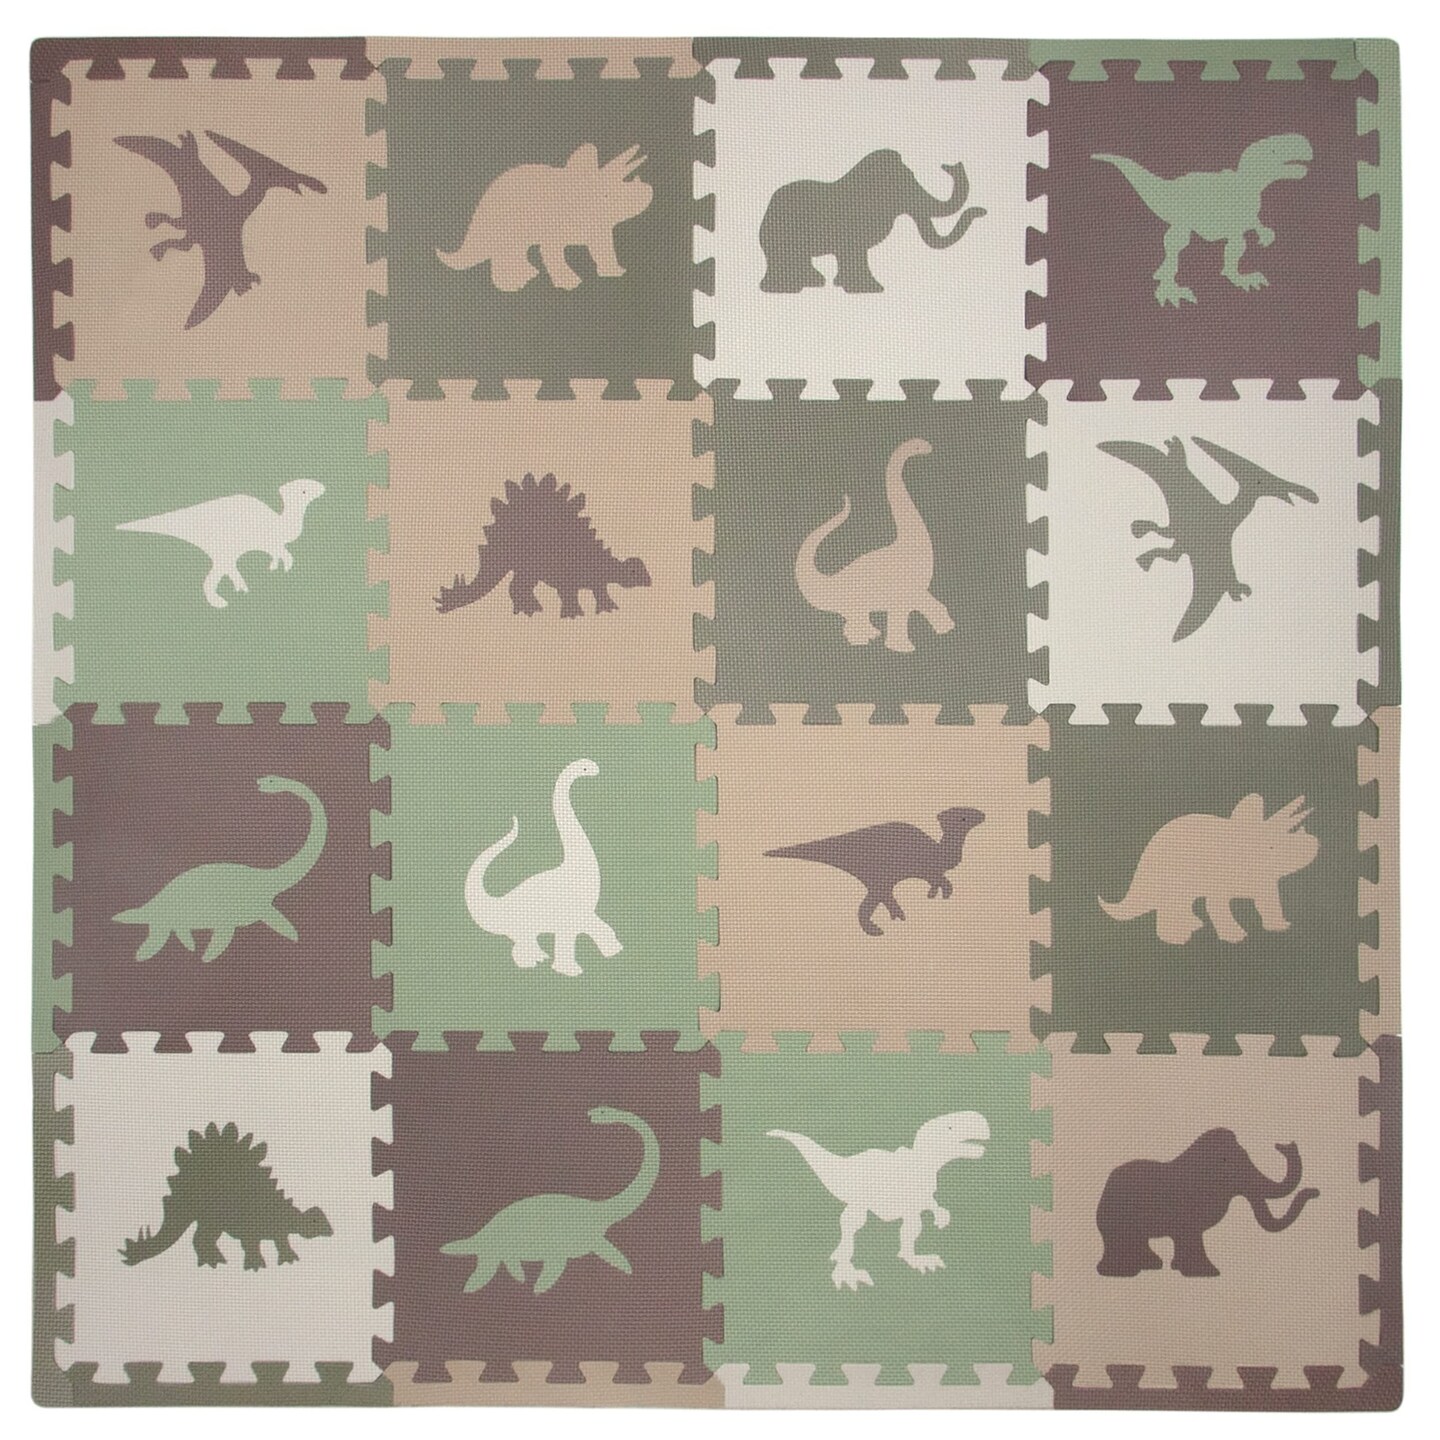 Tadpoles Dinosaur Foam Playmats for Kids | 16 Interlocking Foam Mats with 16 Border Pieces | Waterproof, Durable, and Long-lasting | Total Floor Coverage 50&#x201D; x 50&#x201D; | For Ages 3 and Up | Camouflage